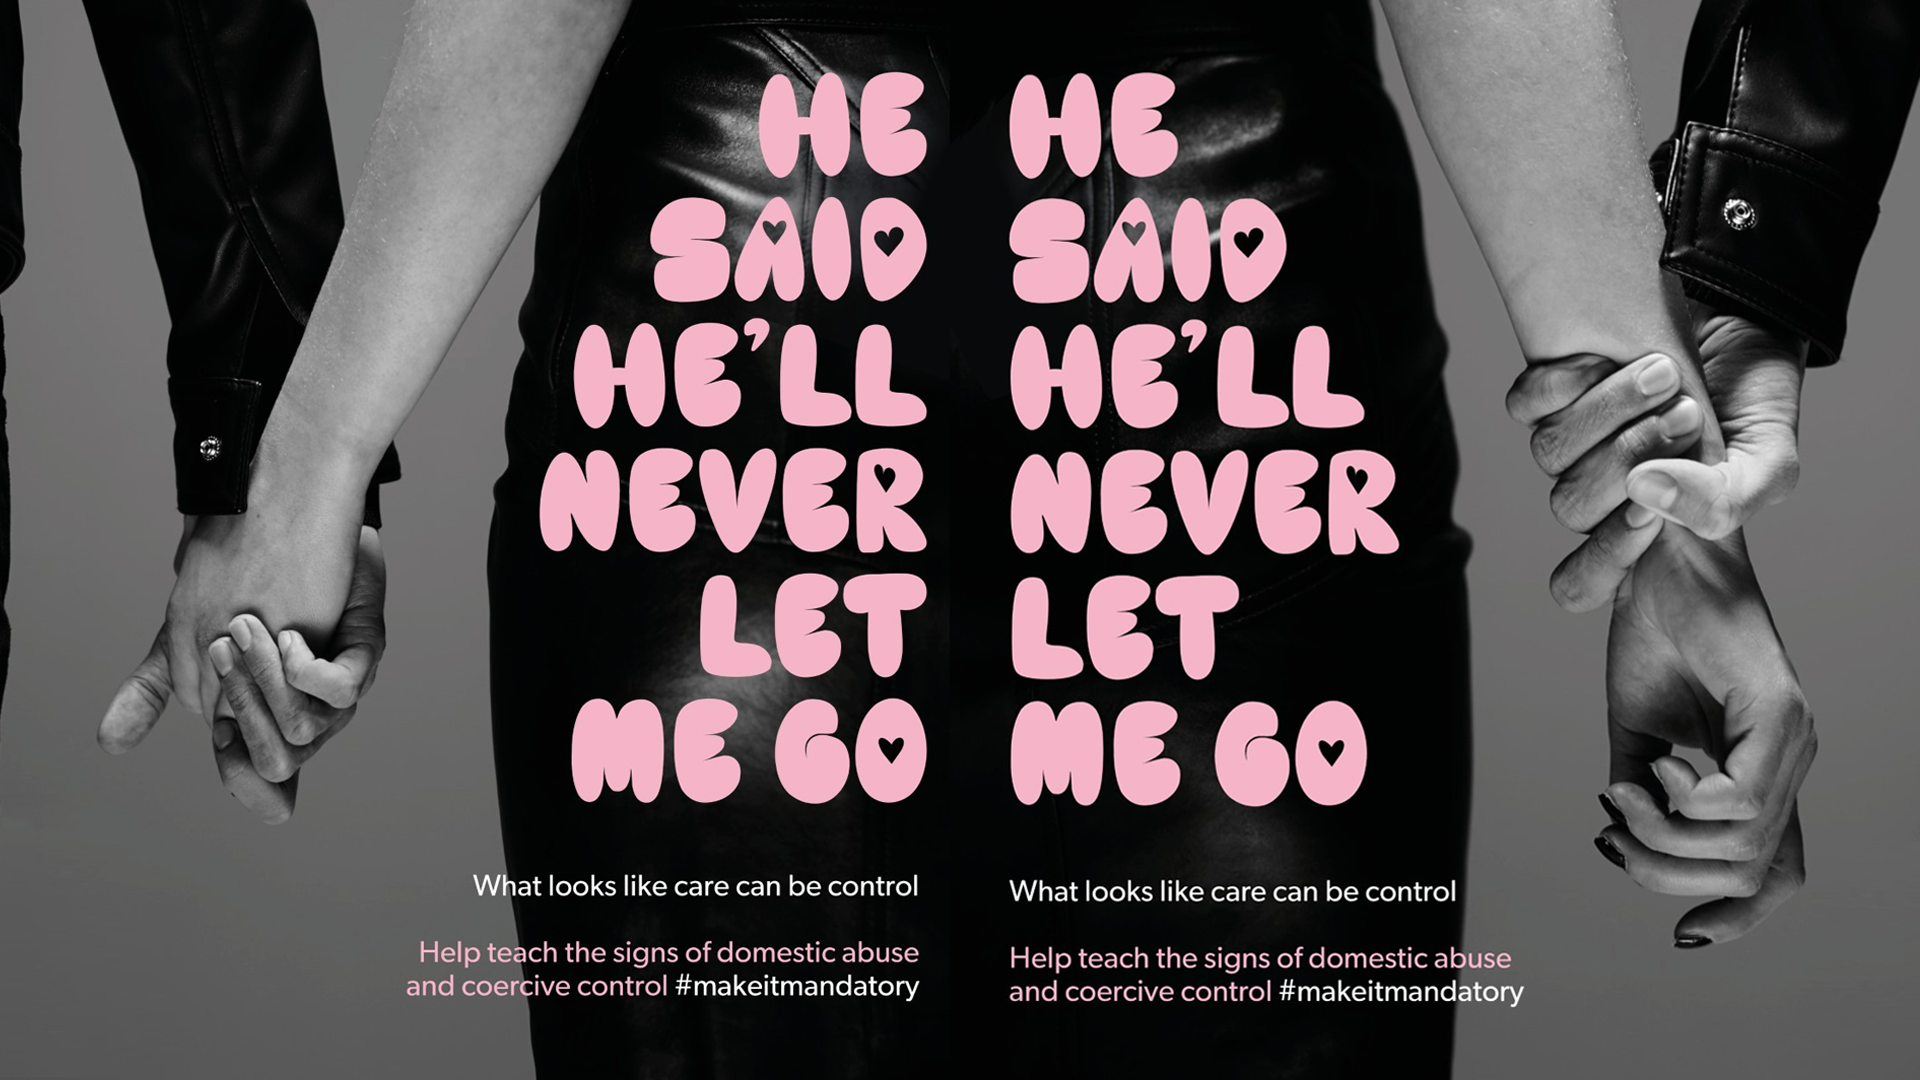 Text reads 'He said he'll never leave me' with two images, one showing hands holding, and one where a wrist is held by the hand.